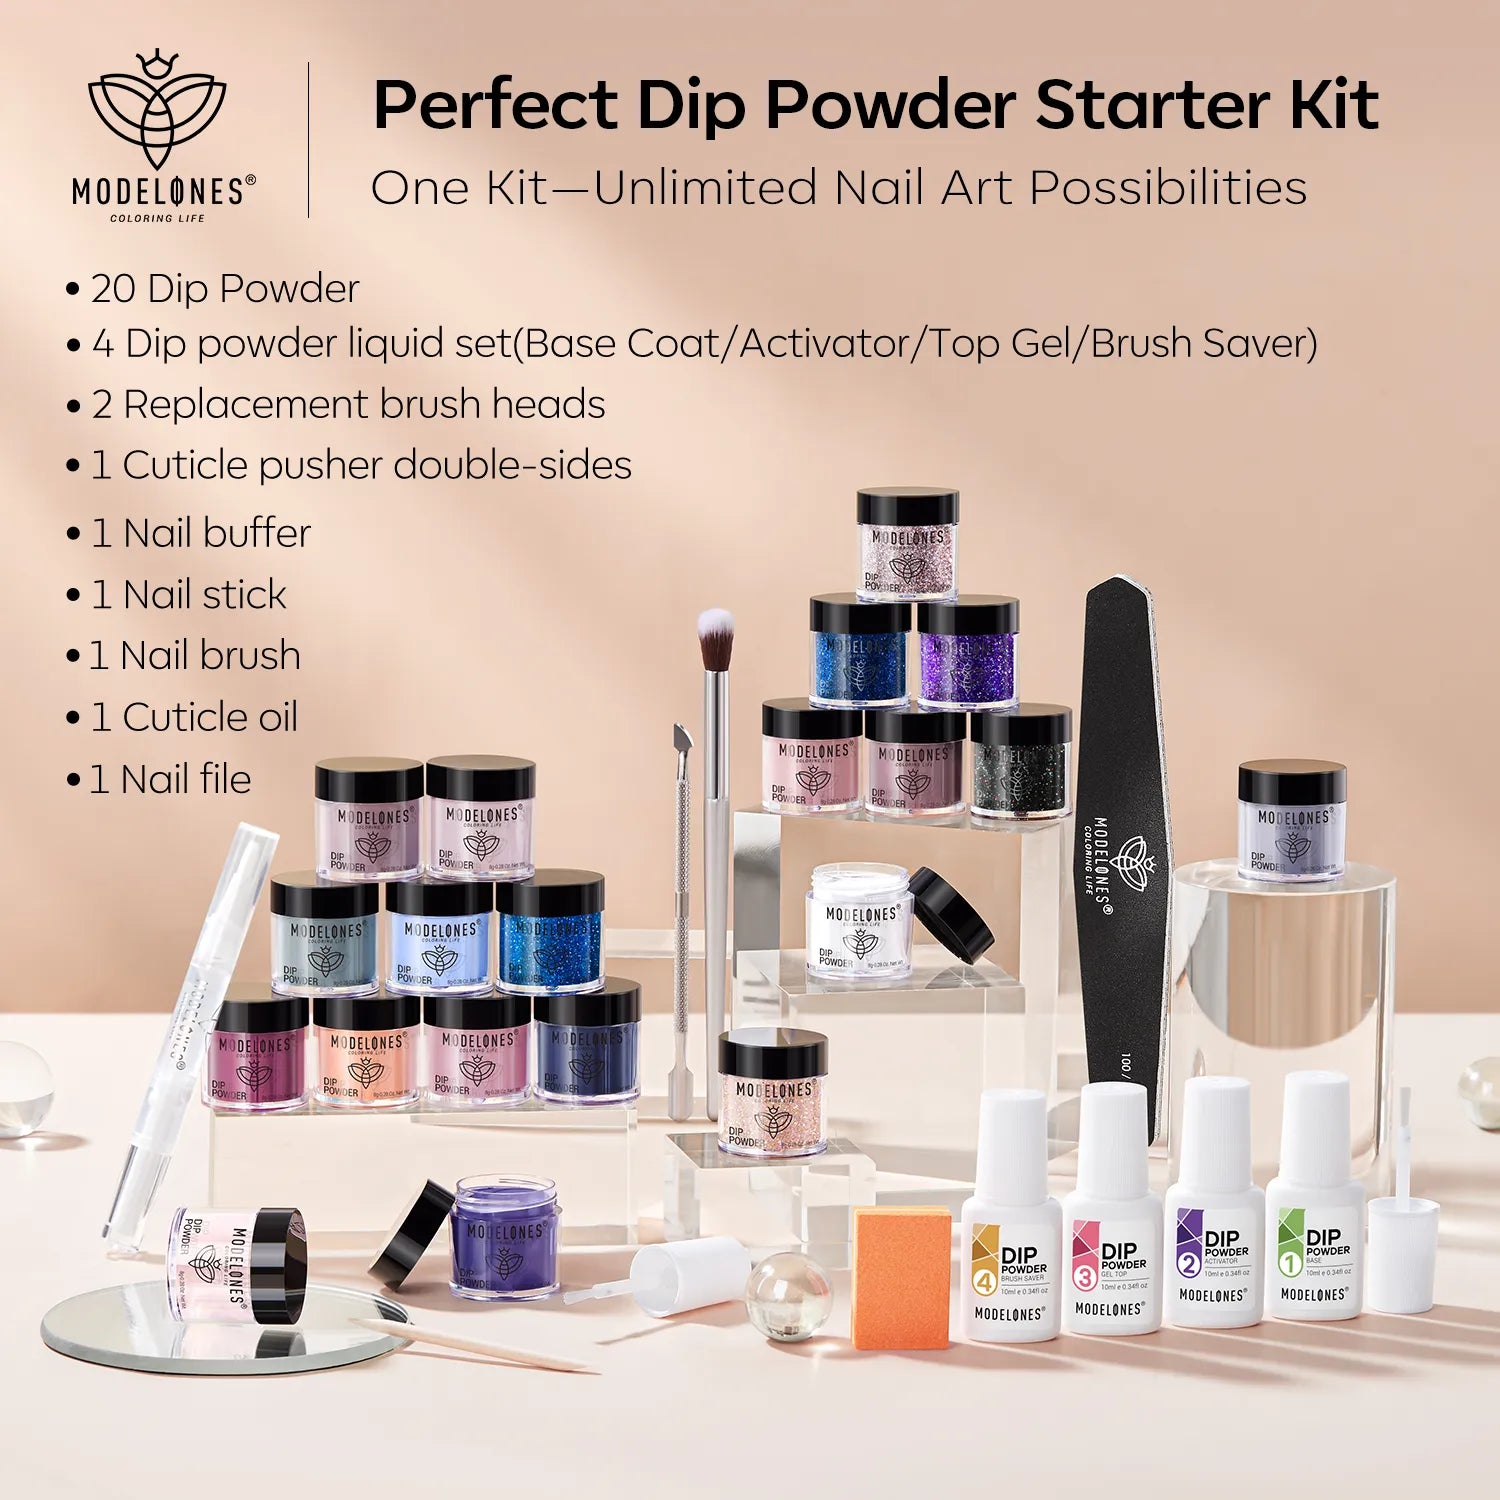 Hot Stuff - 32Pcs 20Colors Dipping Powder All-In-One Kit【US ONLY】